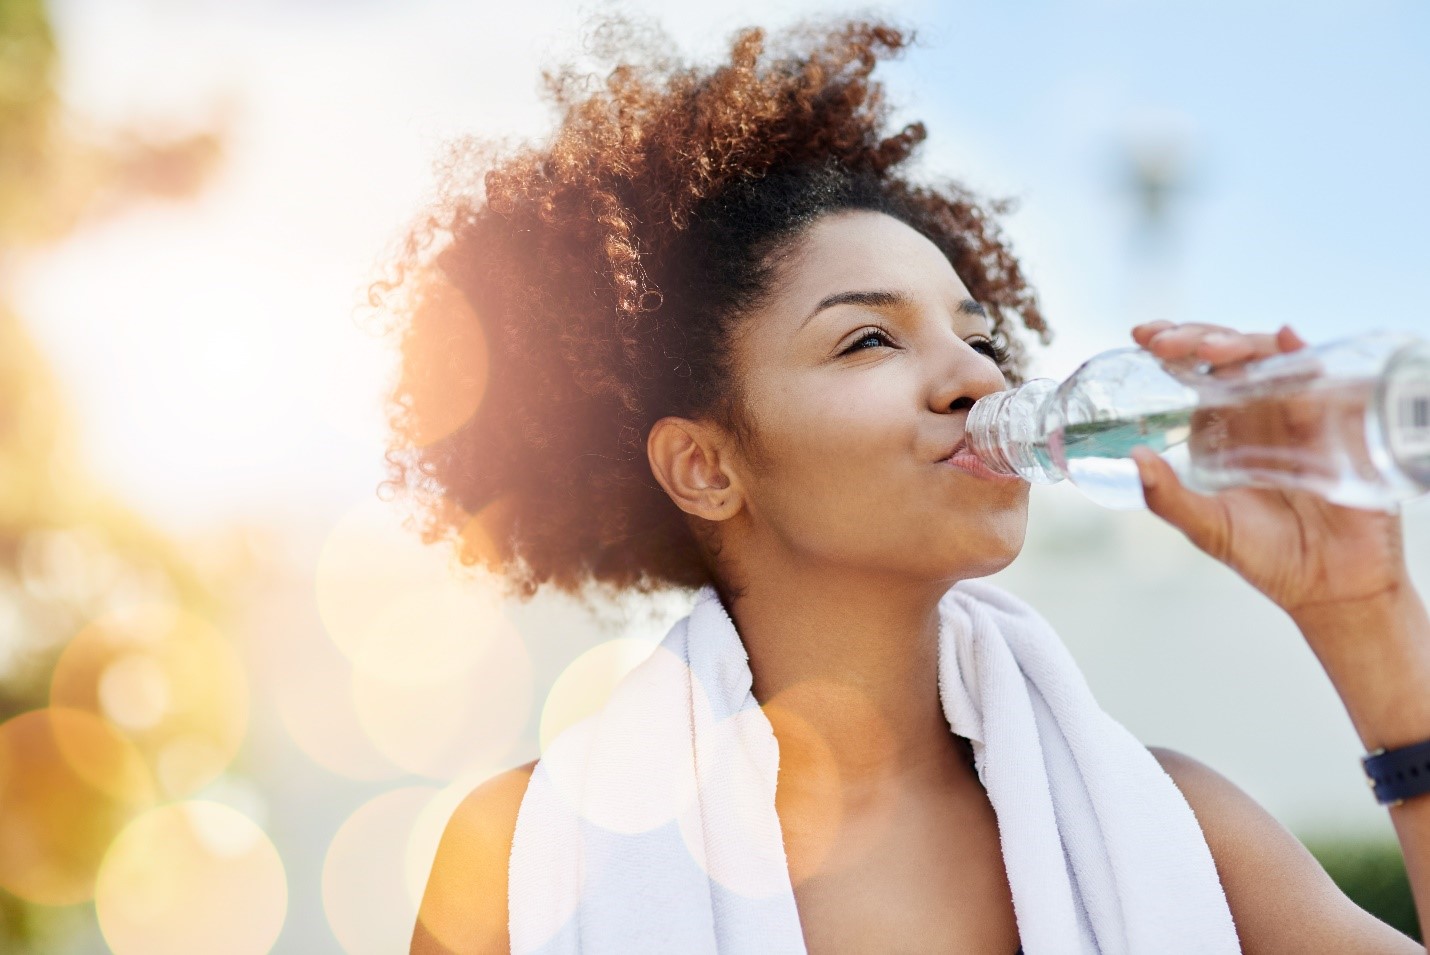 Summer Gets Hot – Hydrate to Stay Safe